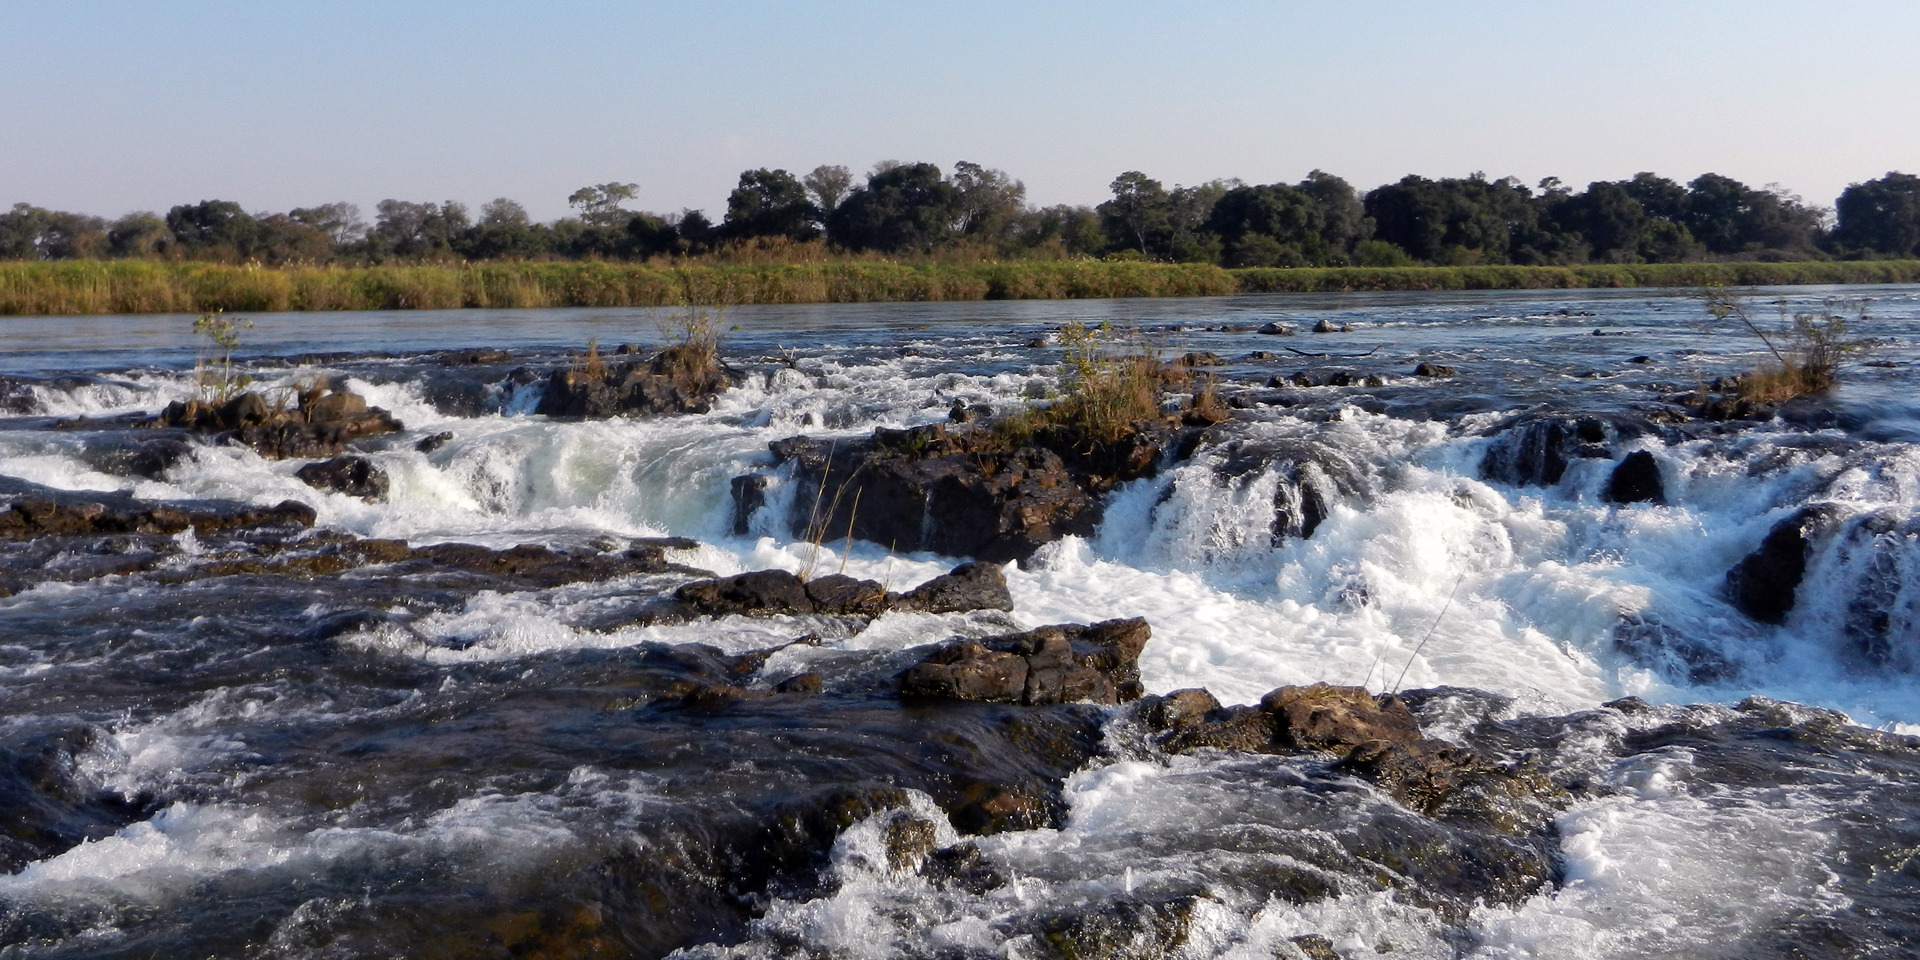 Image of rapids running across stones in a river surrounded by wetlands.